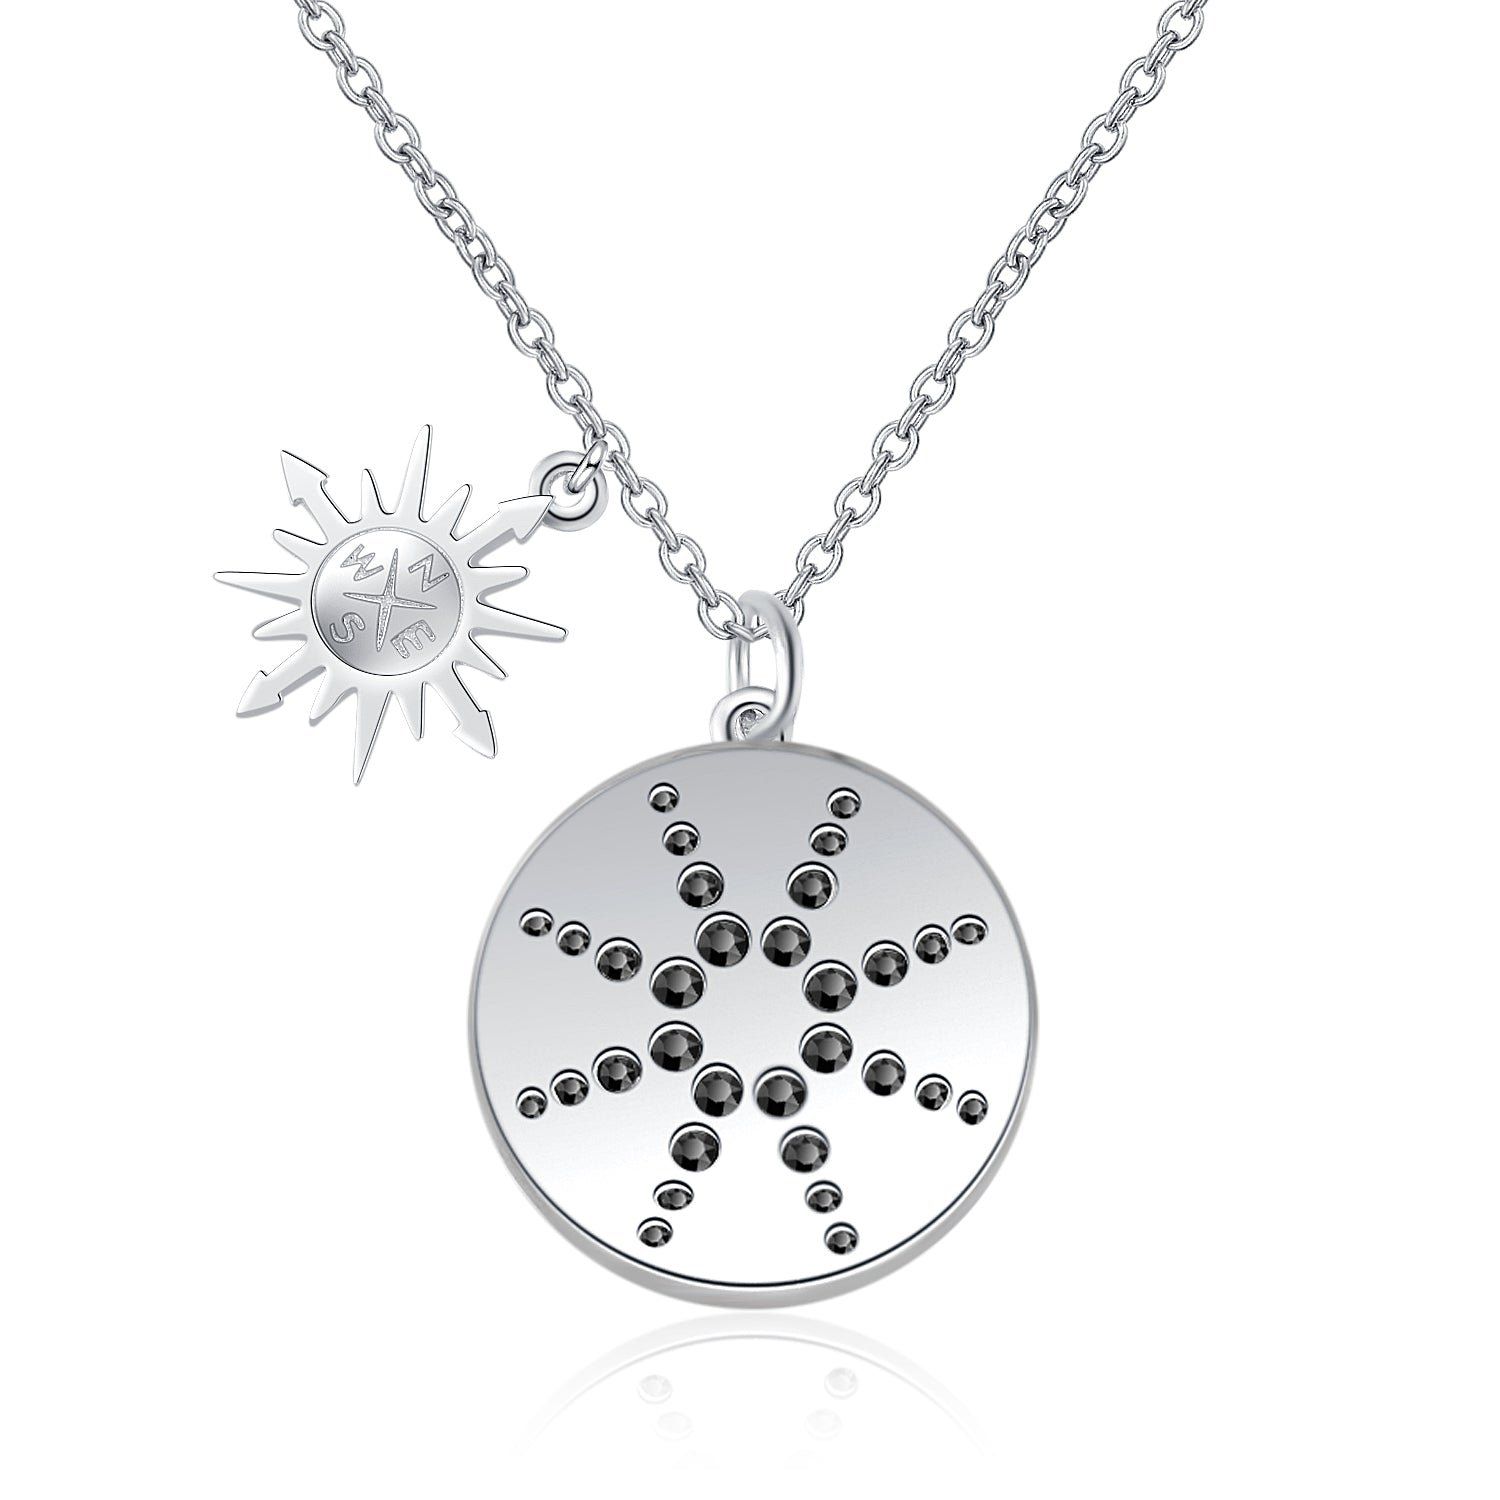 Nautical Necklace High Quality Handcrafted Round Disc Necklace